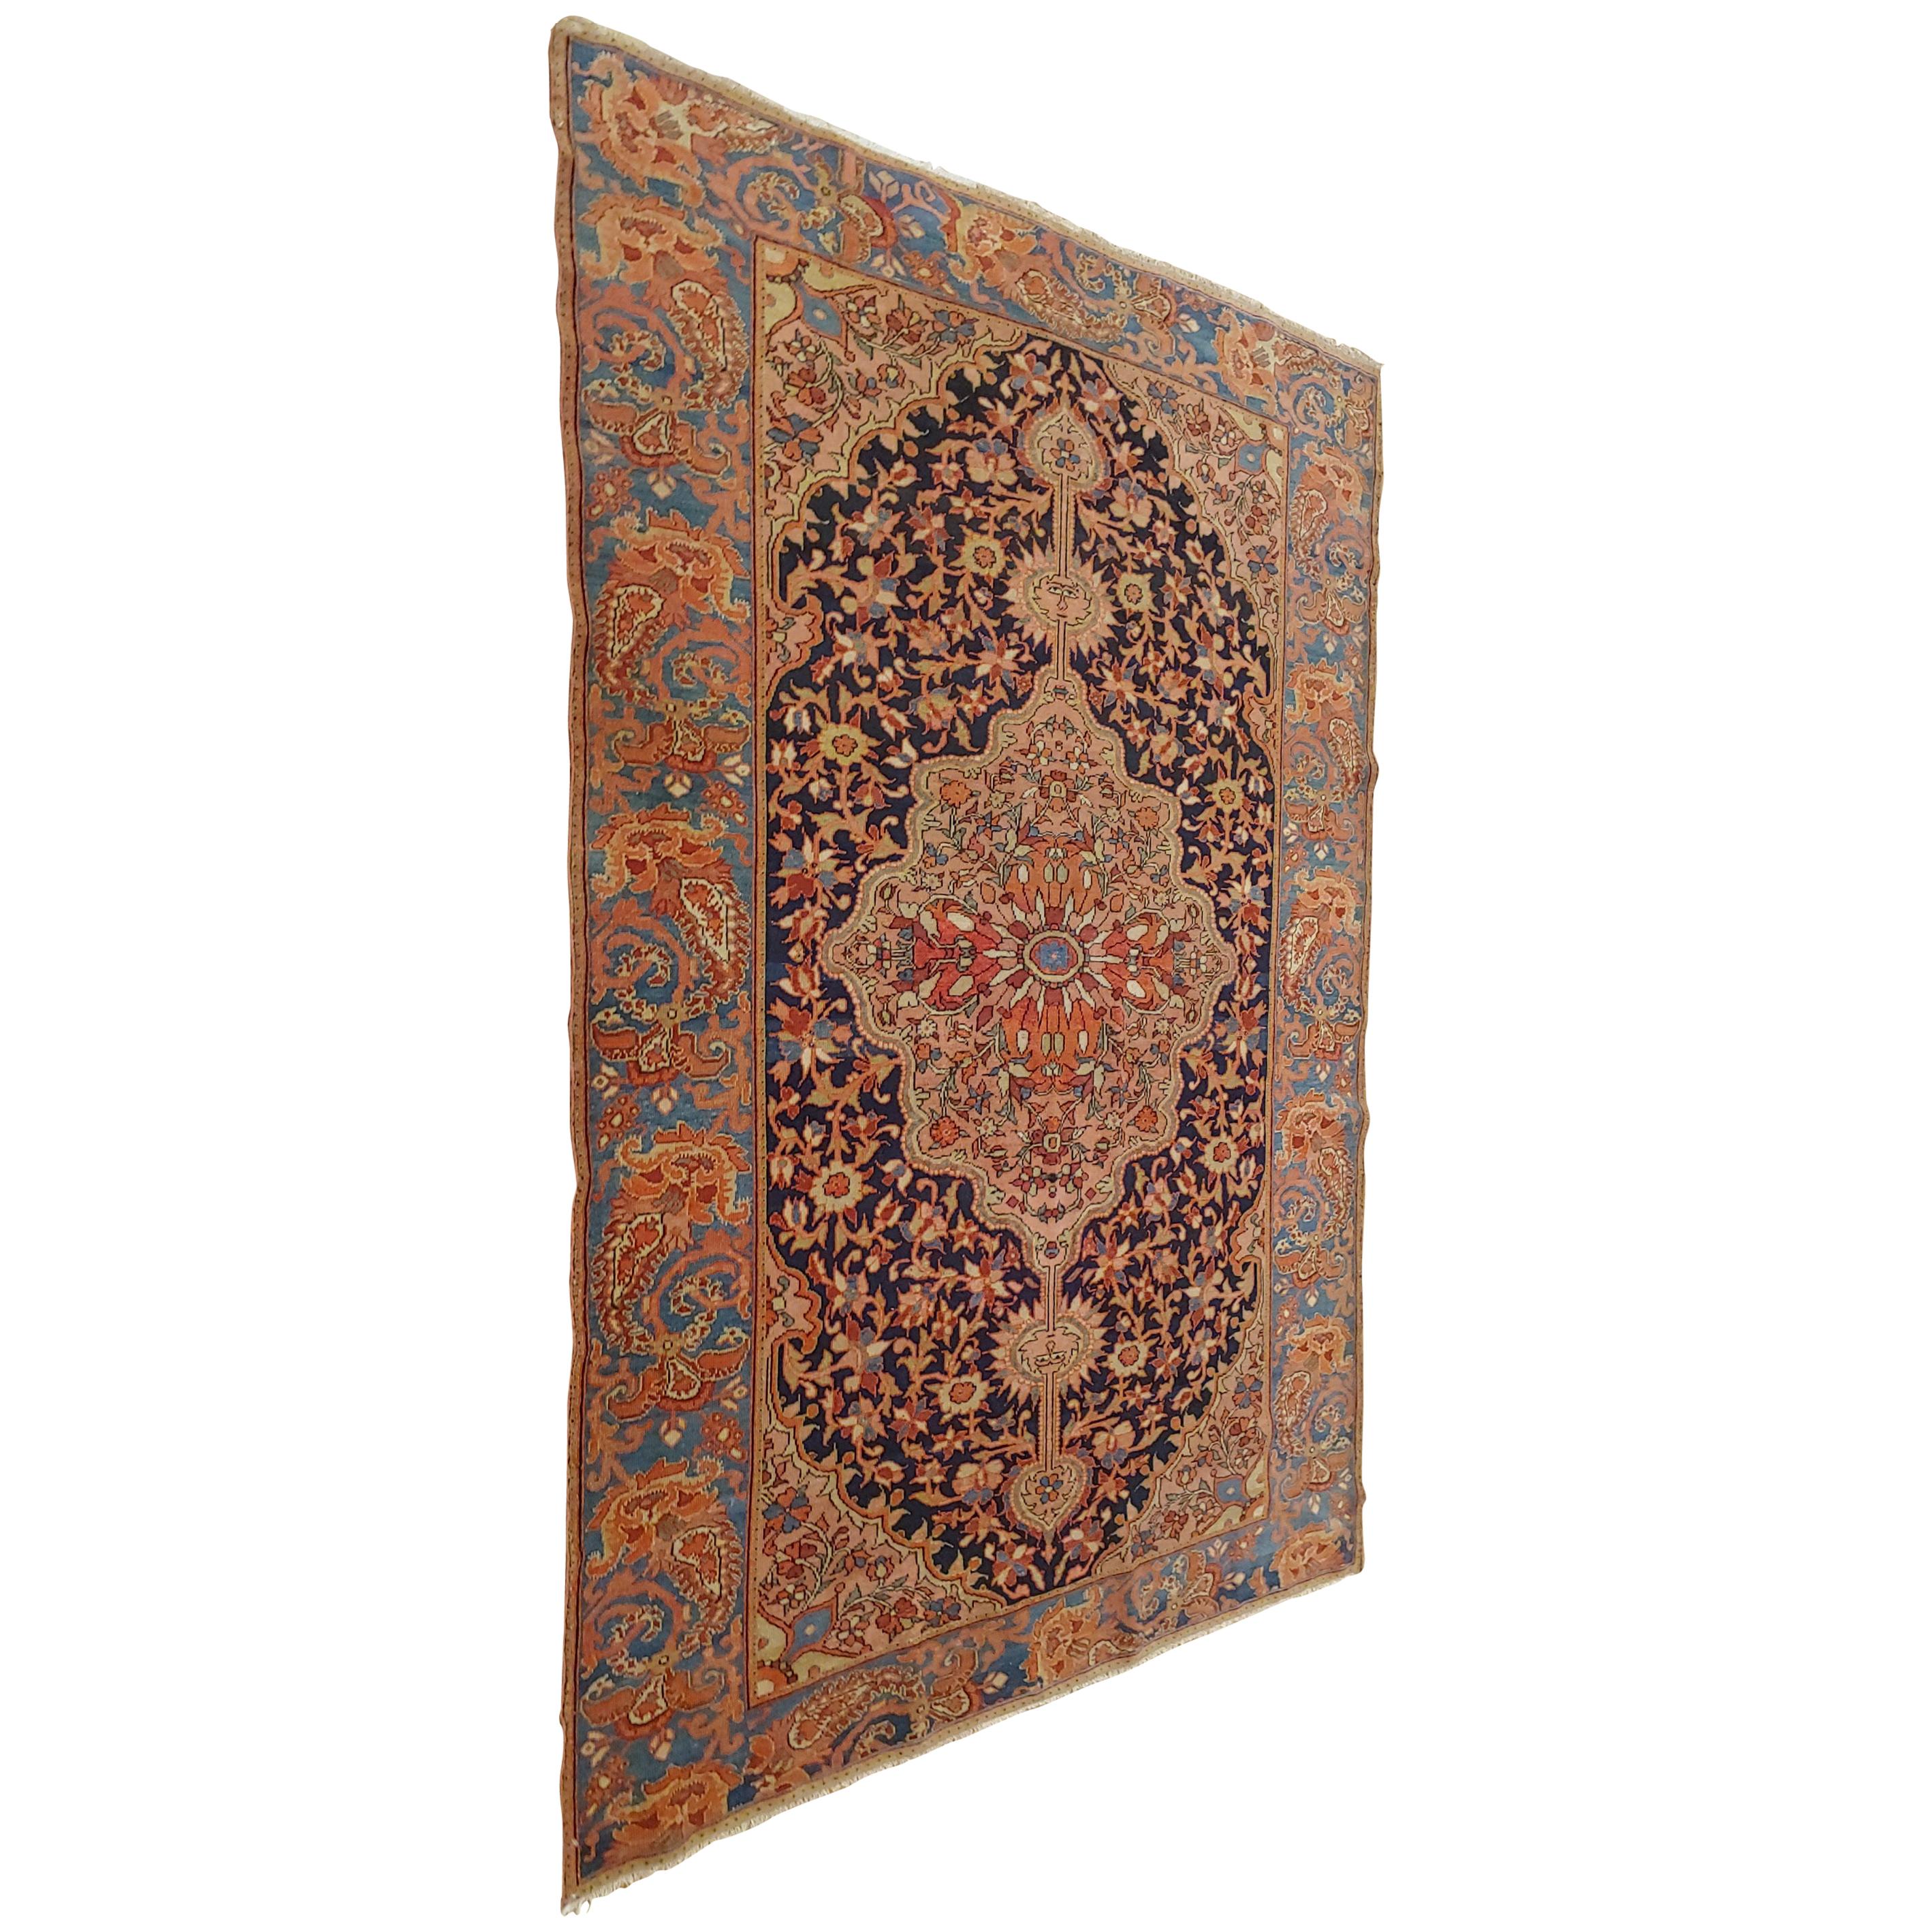 This antique Persian Malayer is from the Hamadan area. Malayer rugs are the finest rugs from the Hamadan region. This particular rug is very finely woven and is highly unusual because of the two smiley faces in the pattern of the rug. Also the